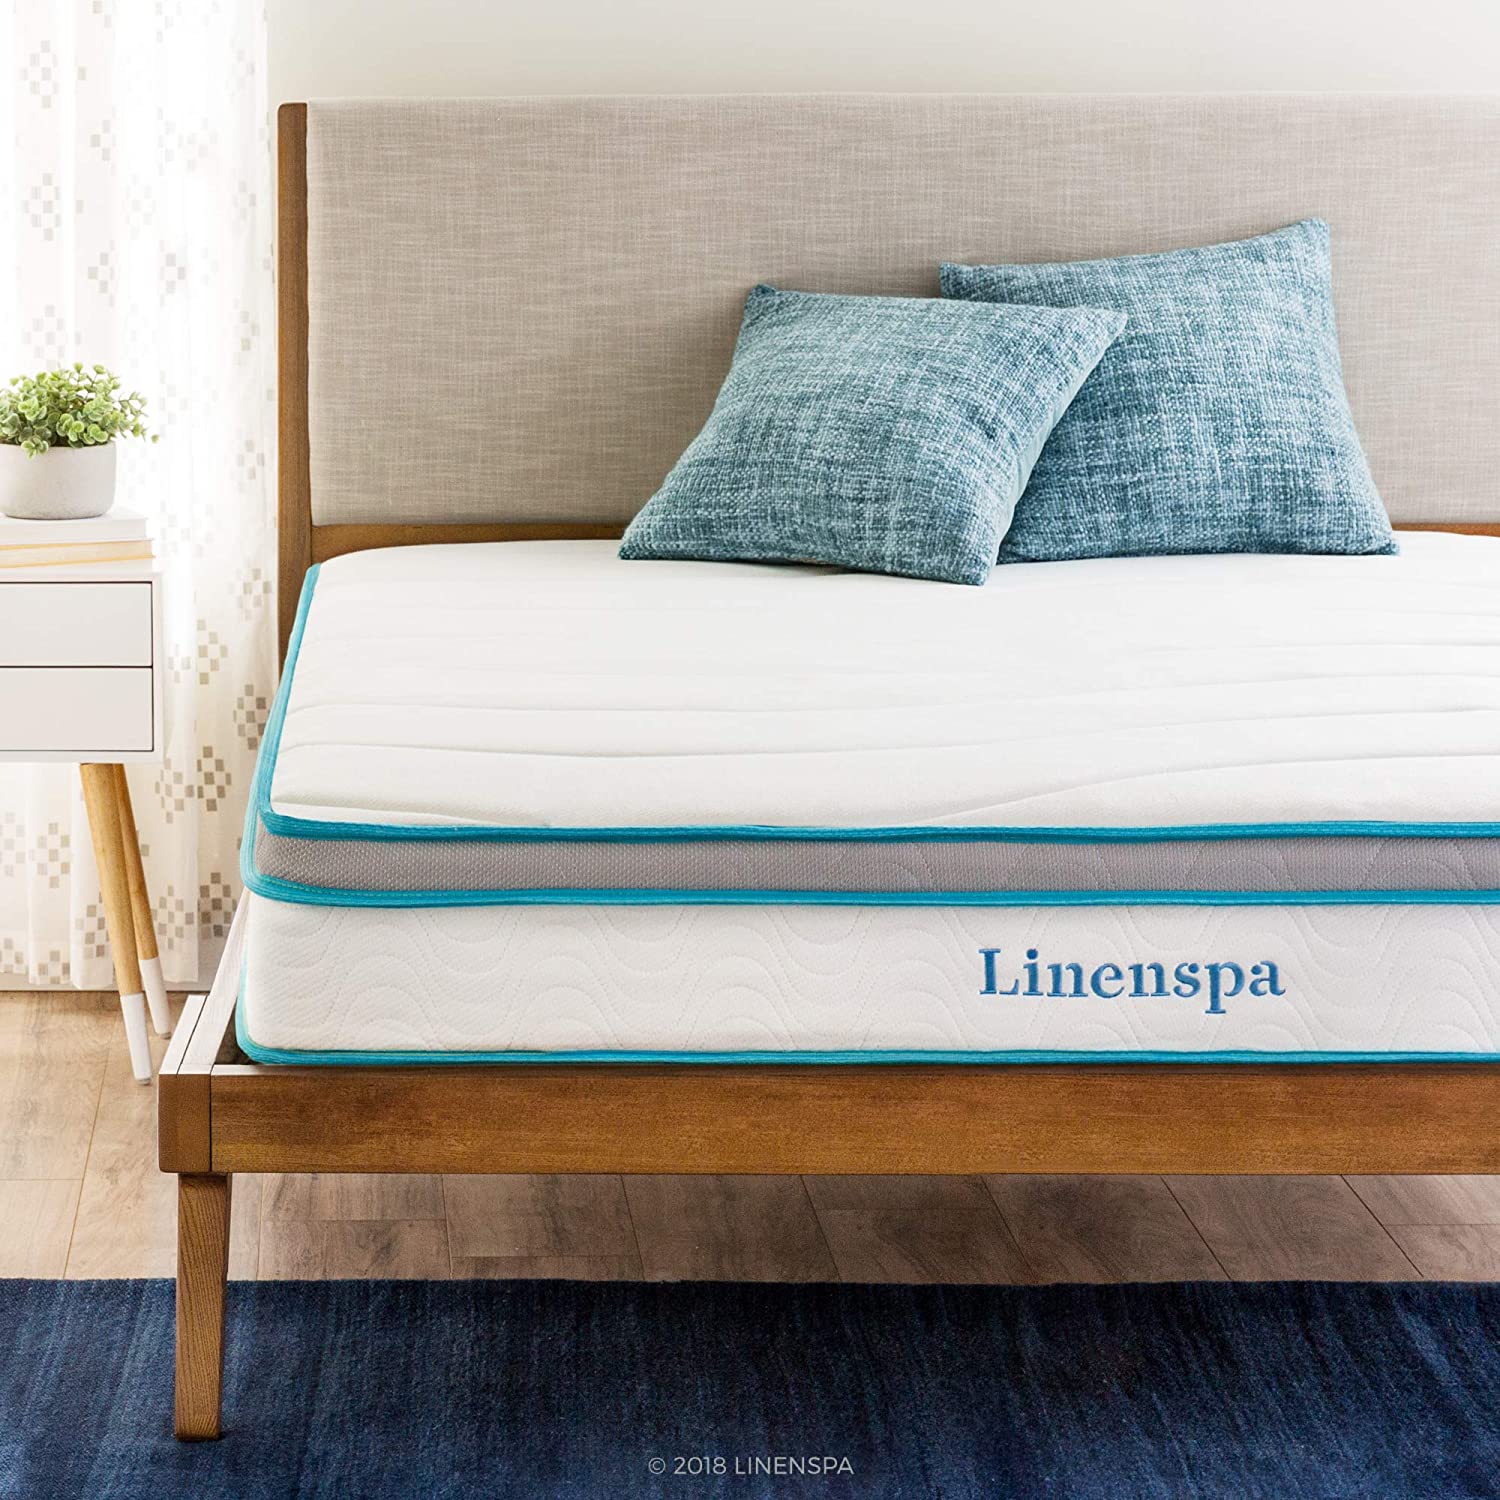 Linenspa Hypoallergenic Knit Cover Mattress For Kids